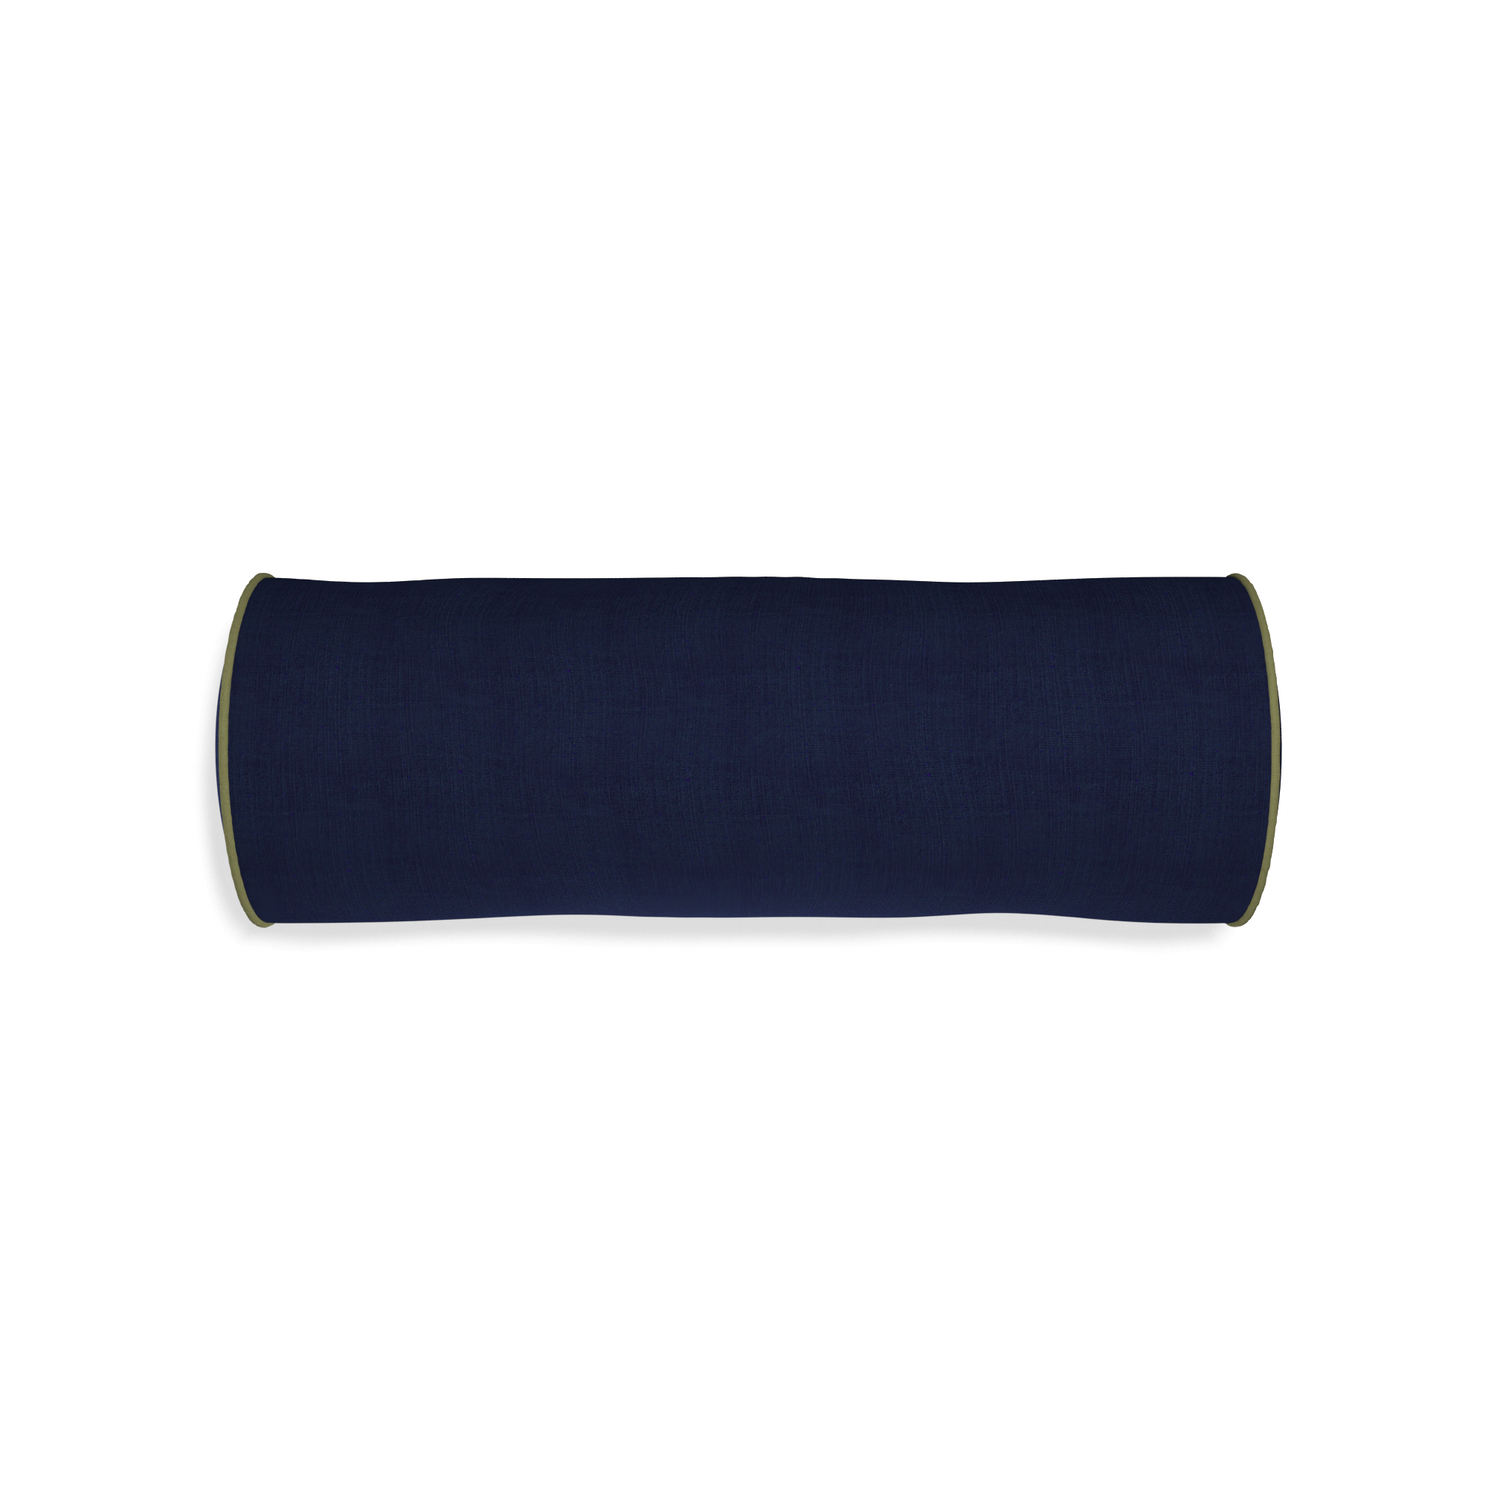 bolster navy blue pillow with moss green piping 